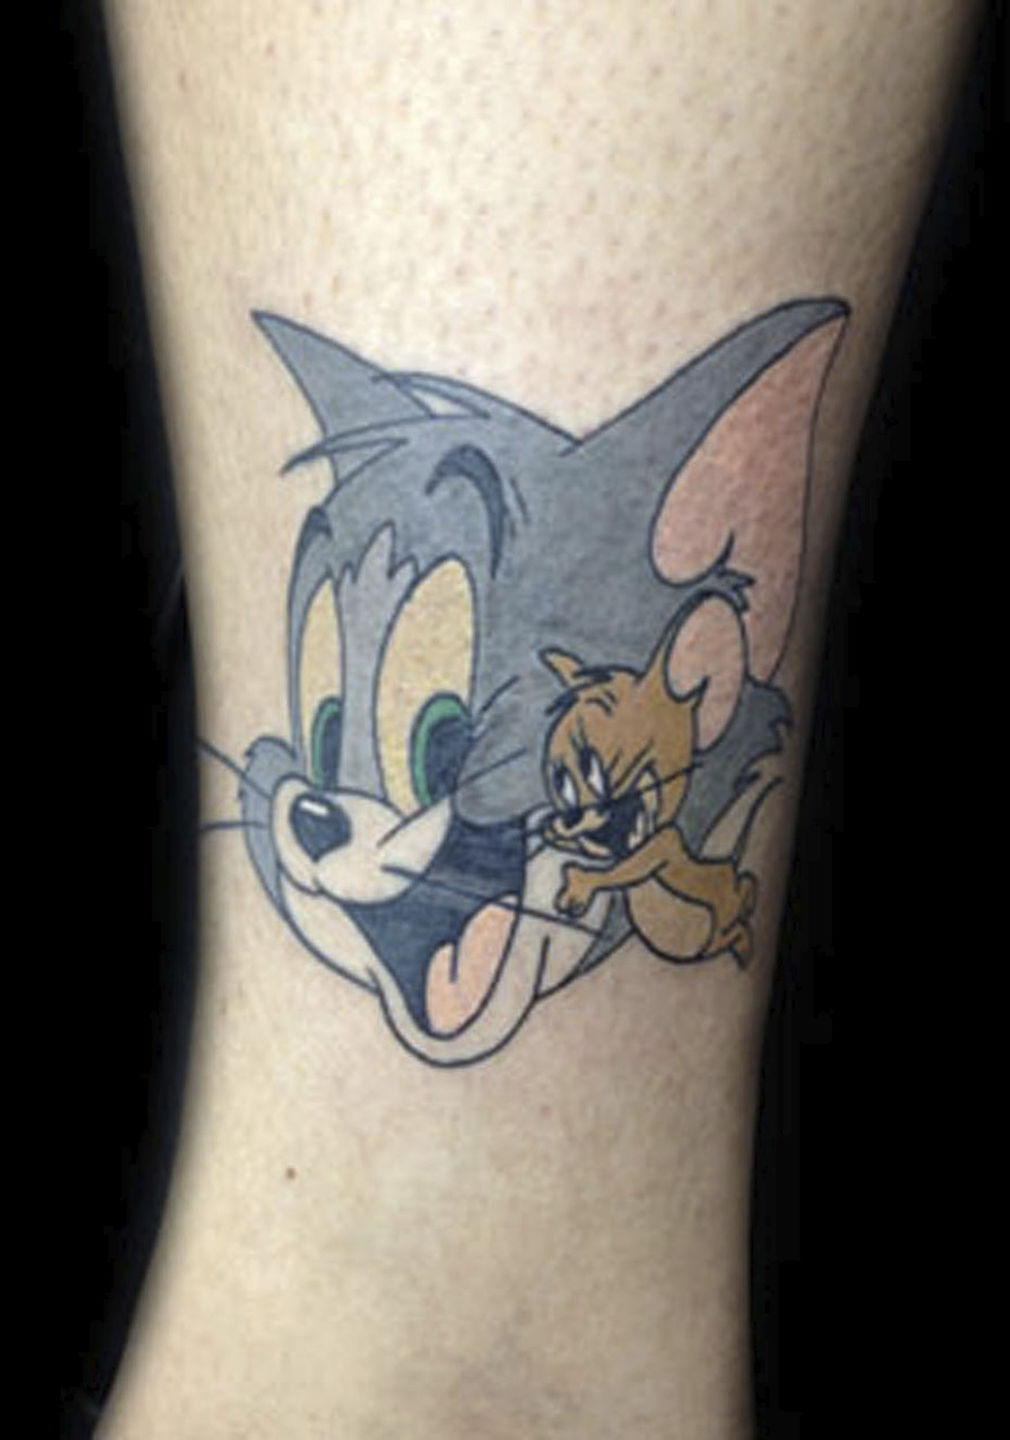 Cartoon style Tom and Jerry tattoo located on the